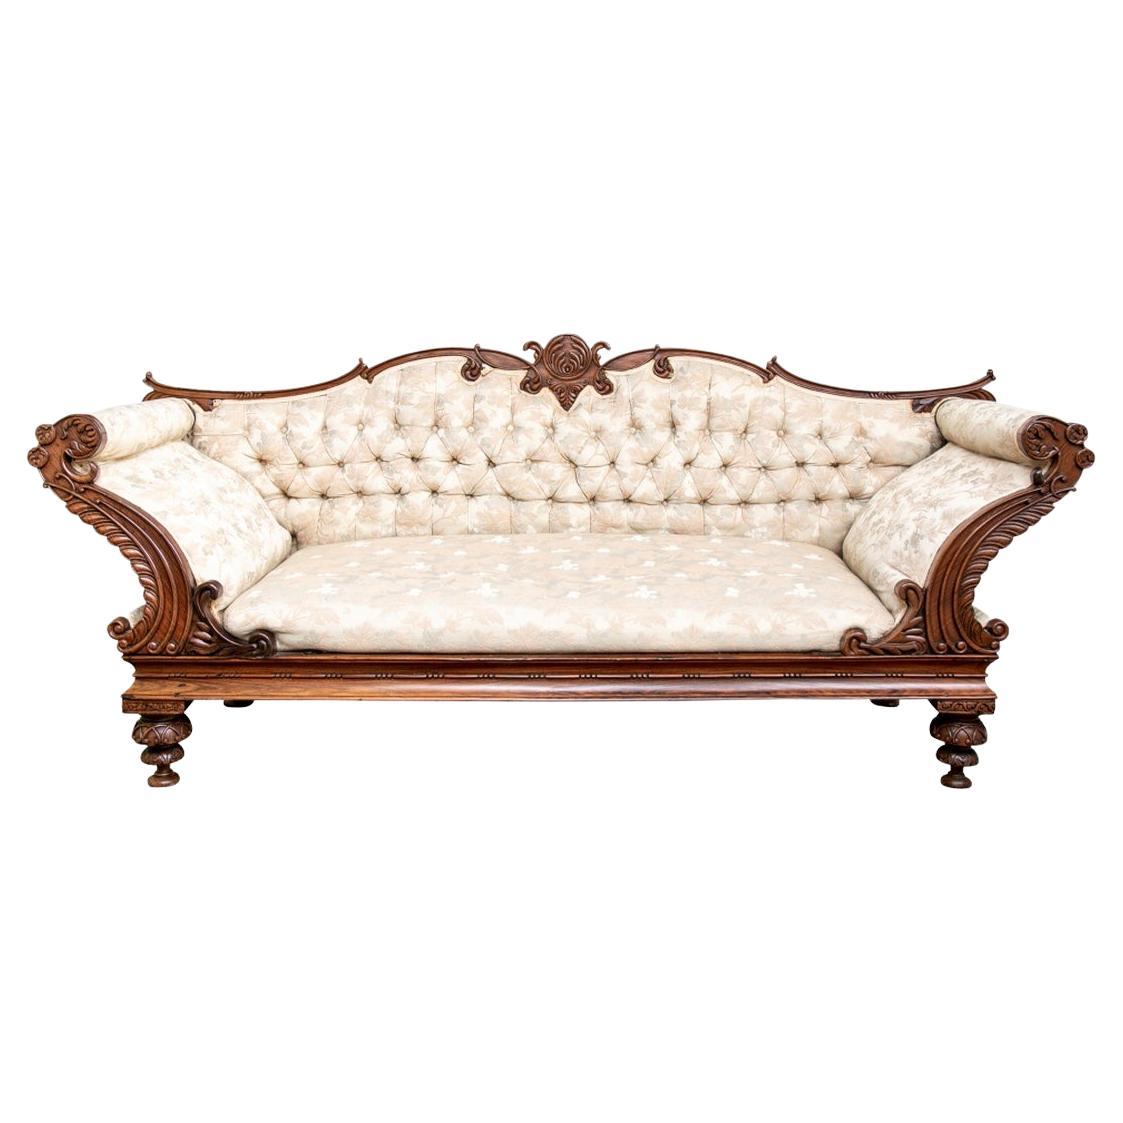 Fine 19th C. Anglo-Indian Carved Rosewood Sofa/ Daybed